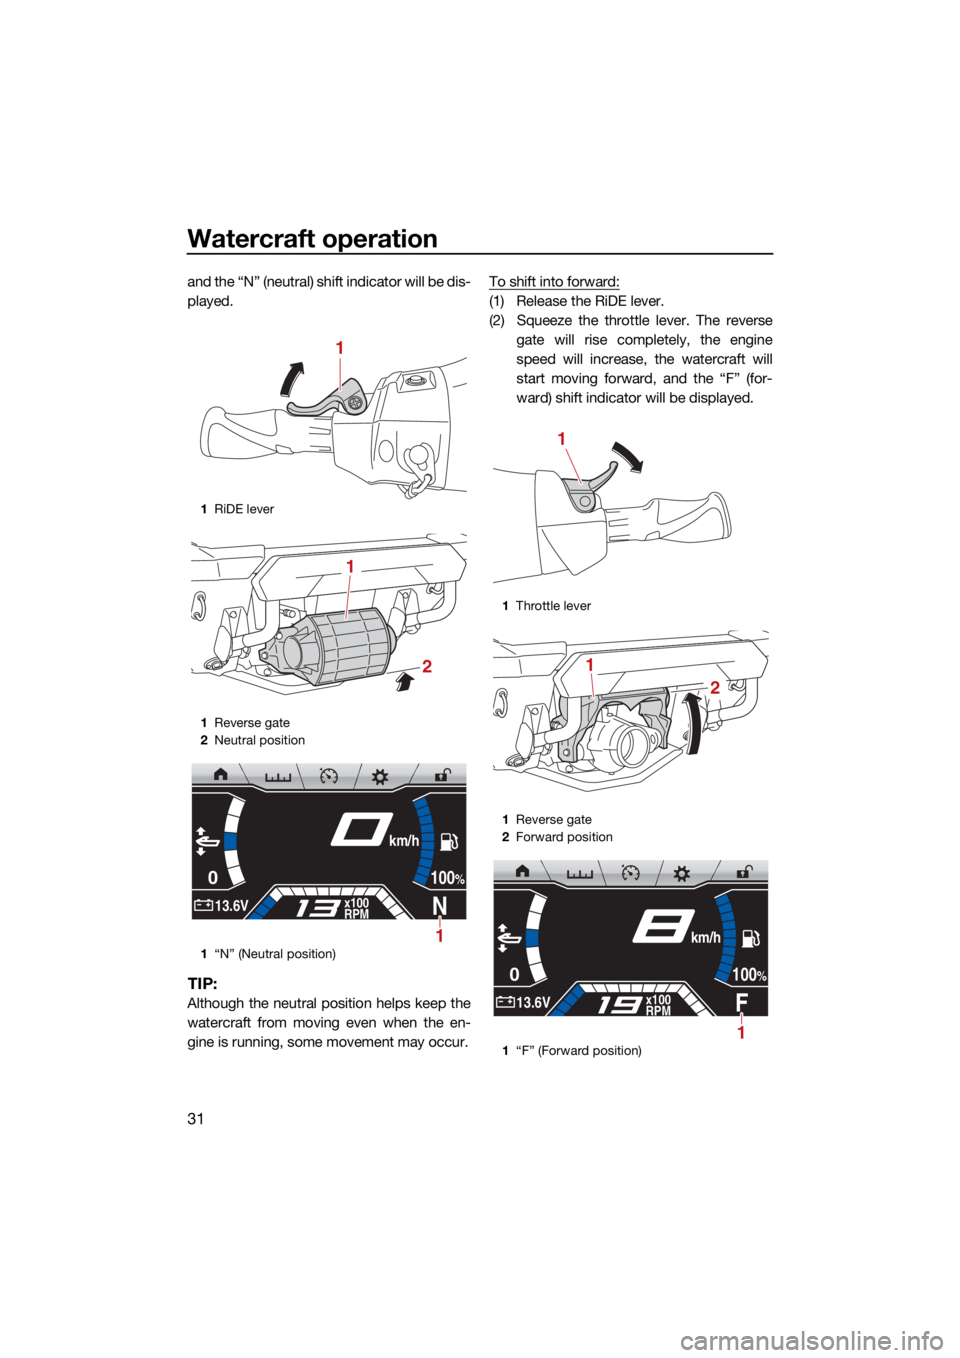 YAMAHA FX SVHO 2021 Owners Guide Watercraft operation
31
and the “N” (neutral) shift indicator will be dis-
played.
TIP:
Although the neutral position helps keep the
watercraft from moving even when the en-
gine is running, some 